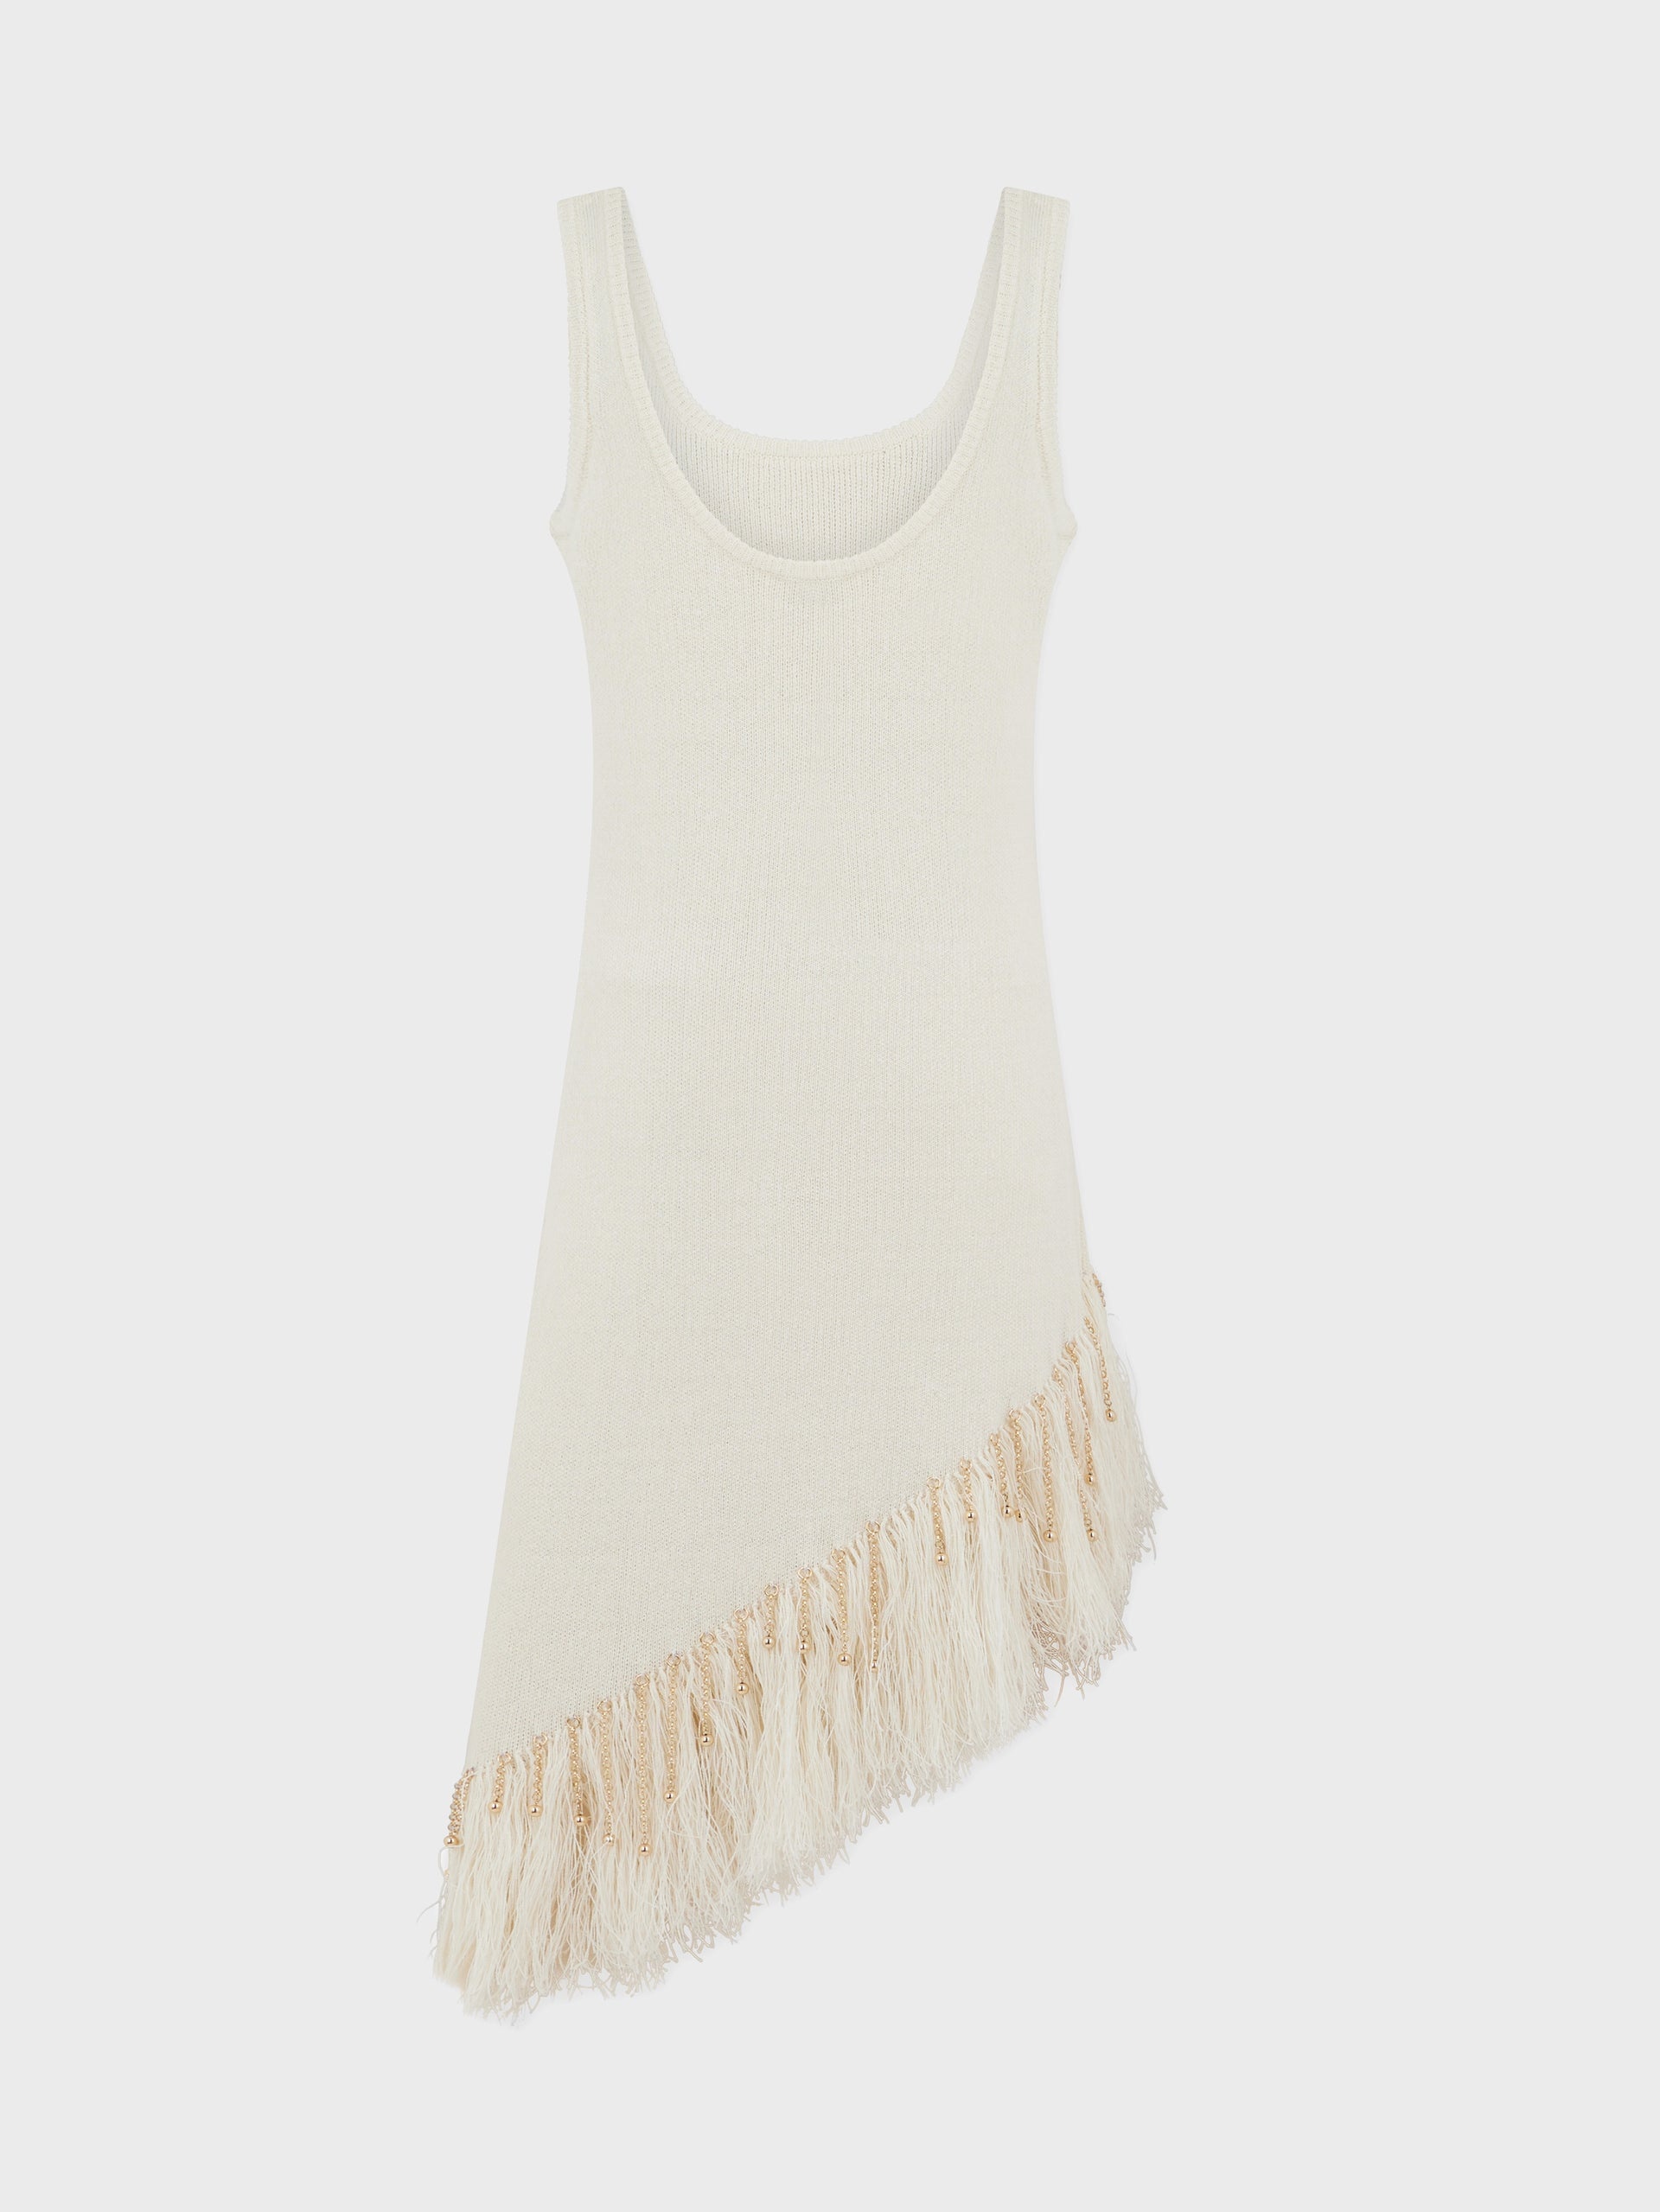 ASYMMETRICAL OFF WHITE WOVEN DRESS WITH KNITTED BEADS AND FEATHERS - 6